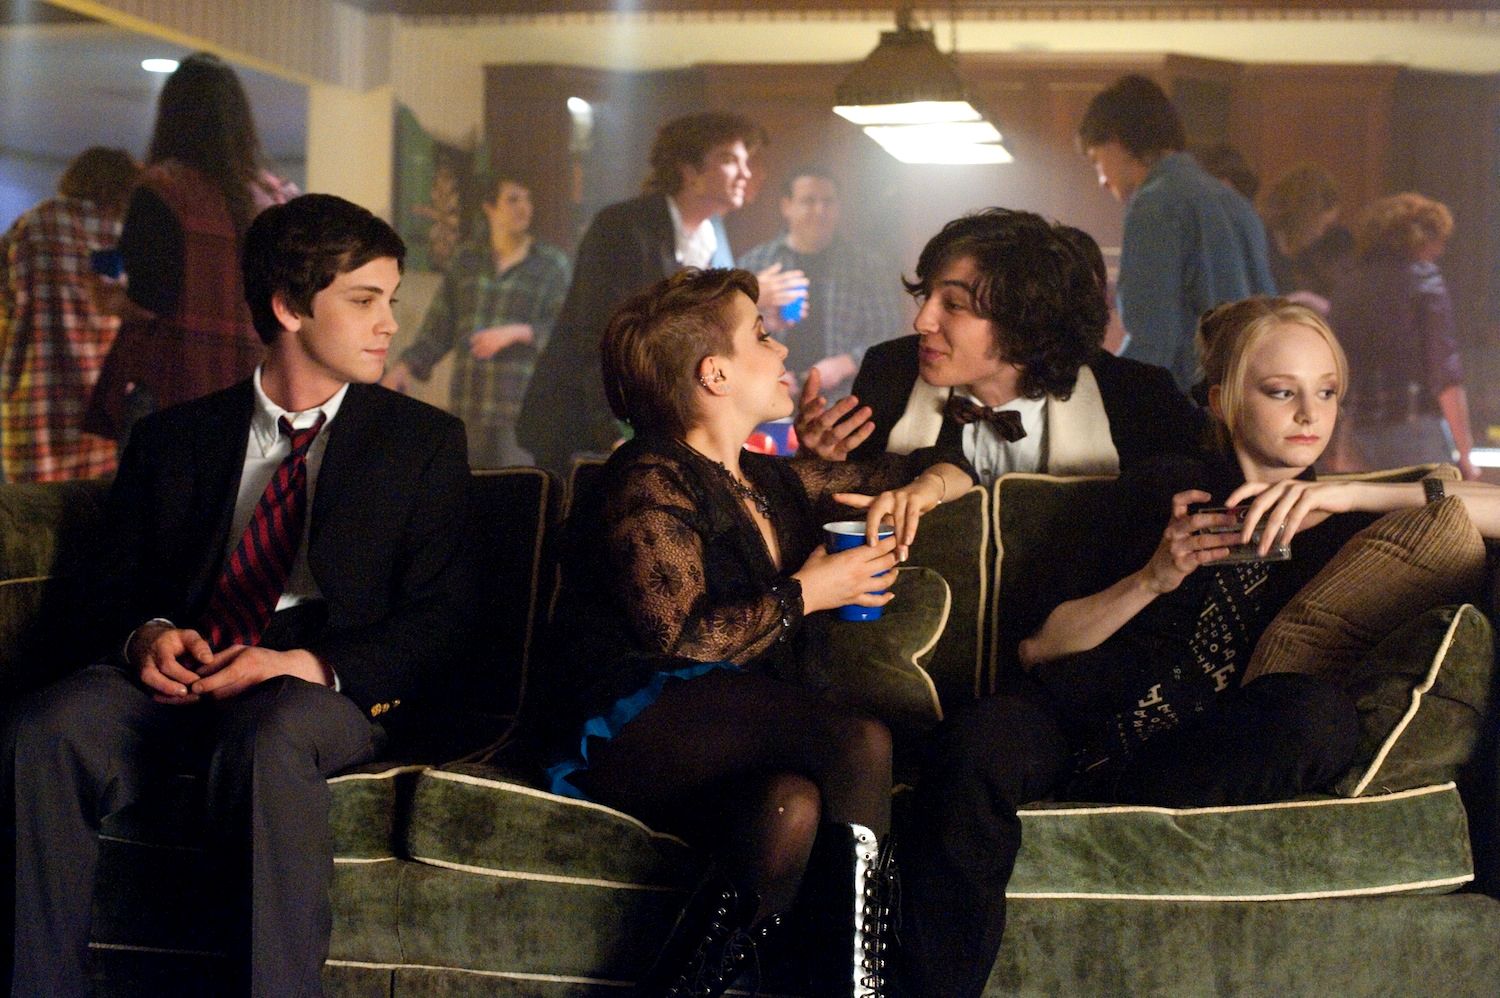 Edelstein: The Perks of Being a Wallflower Nails Teenage Alienation